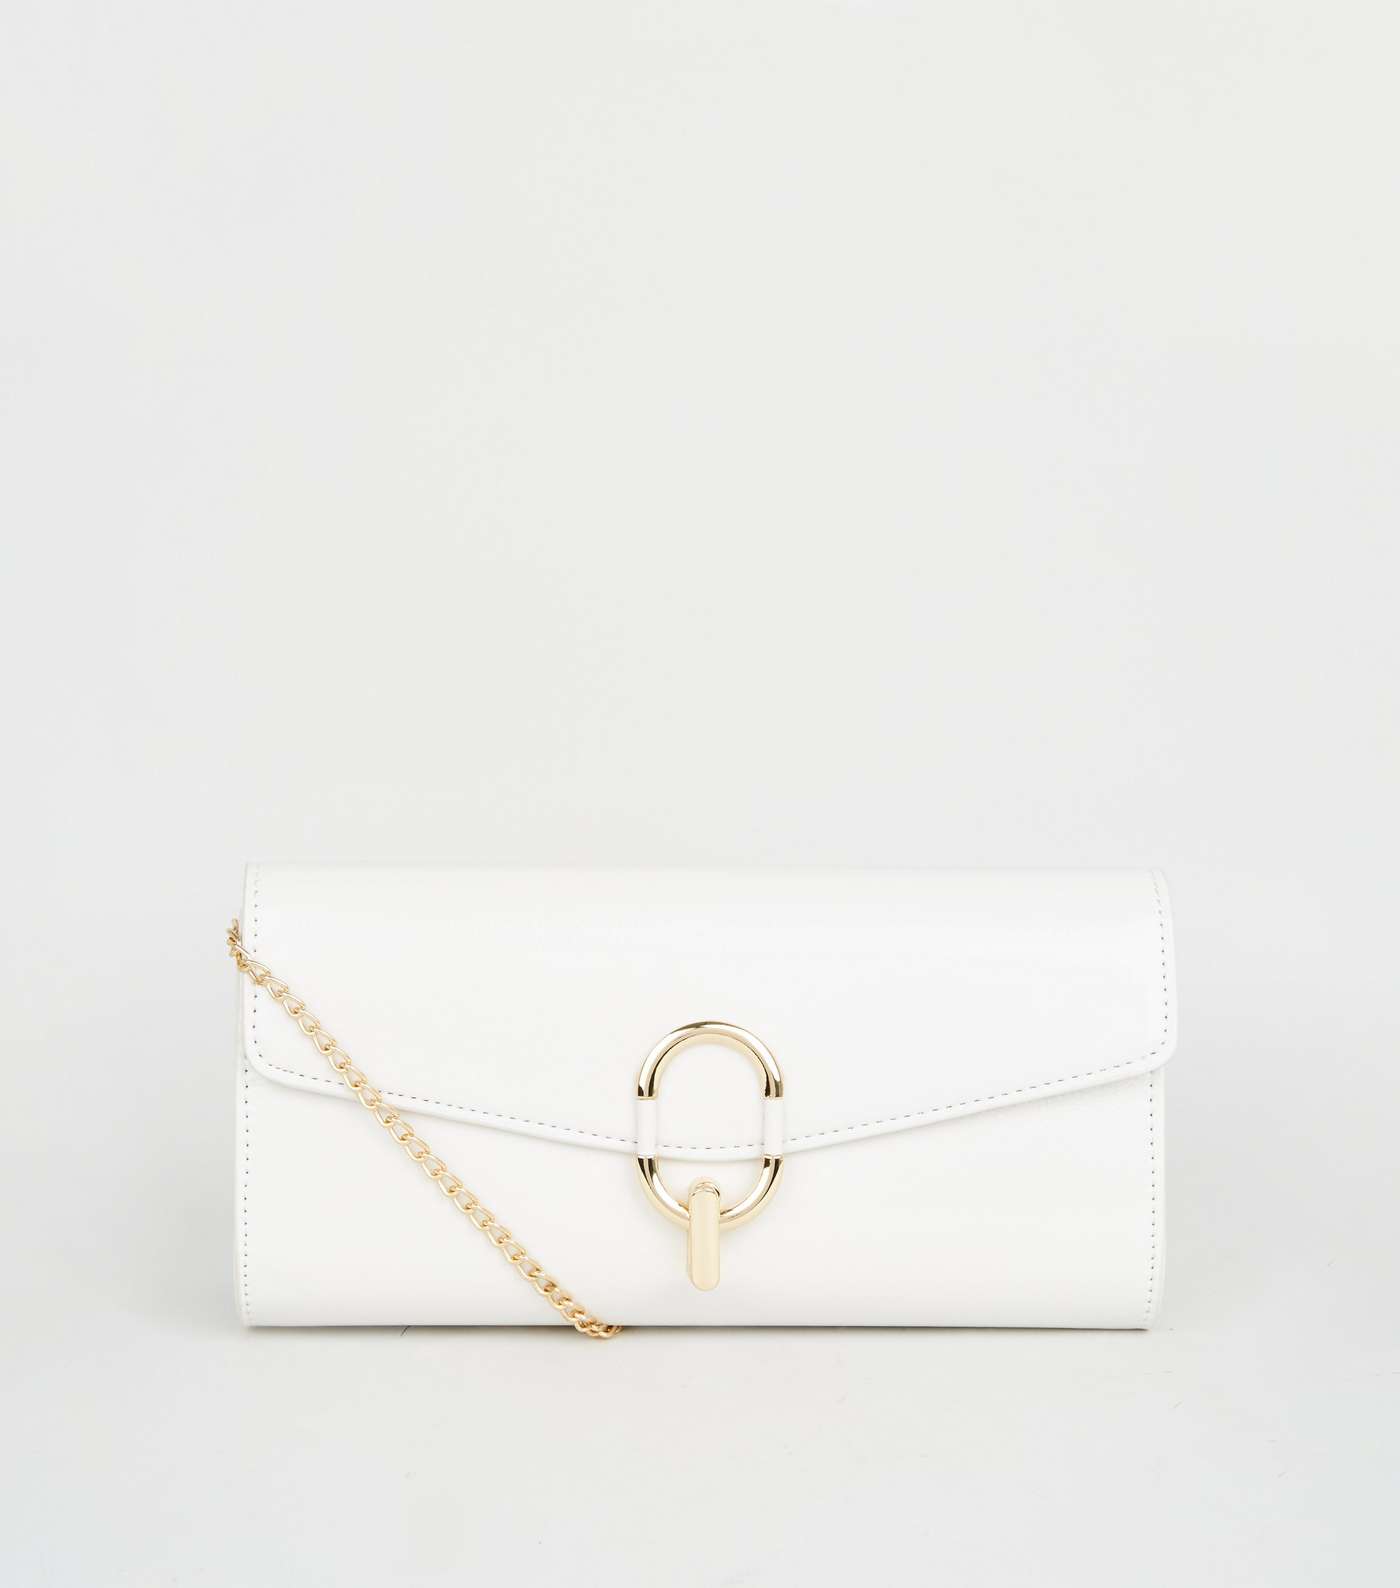 Off White Leather-Look Ring Clutch Bag